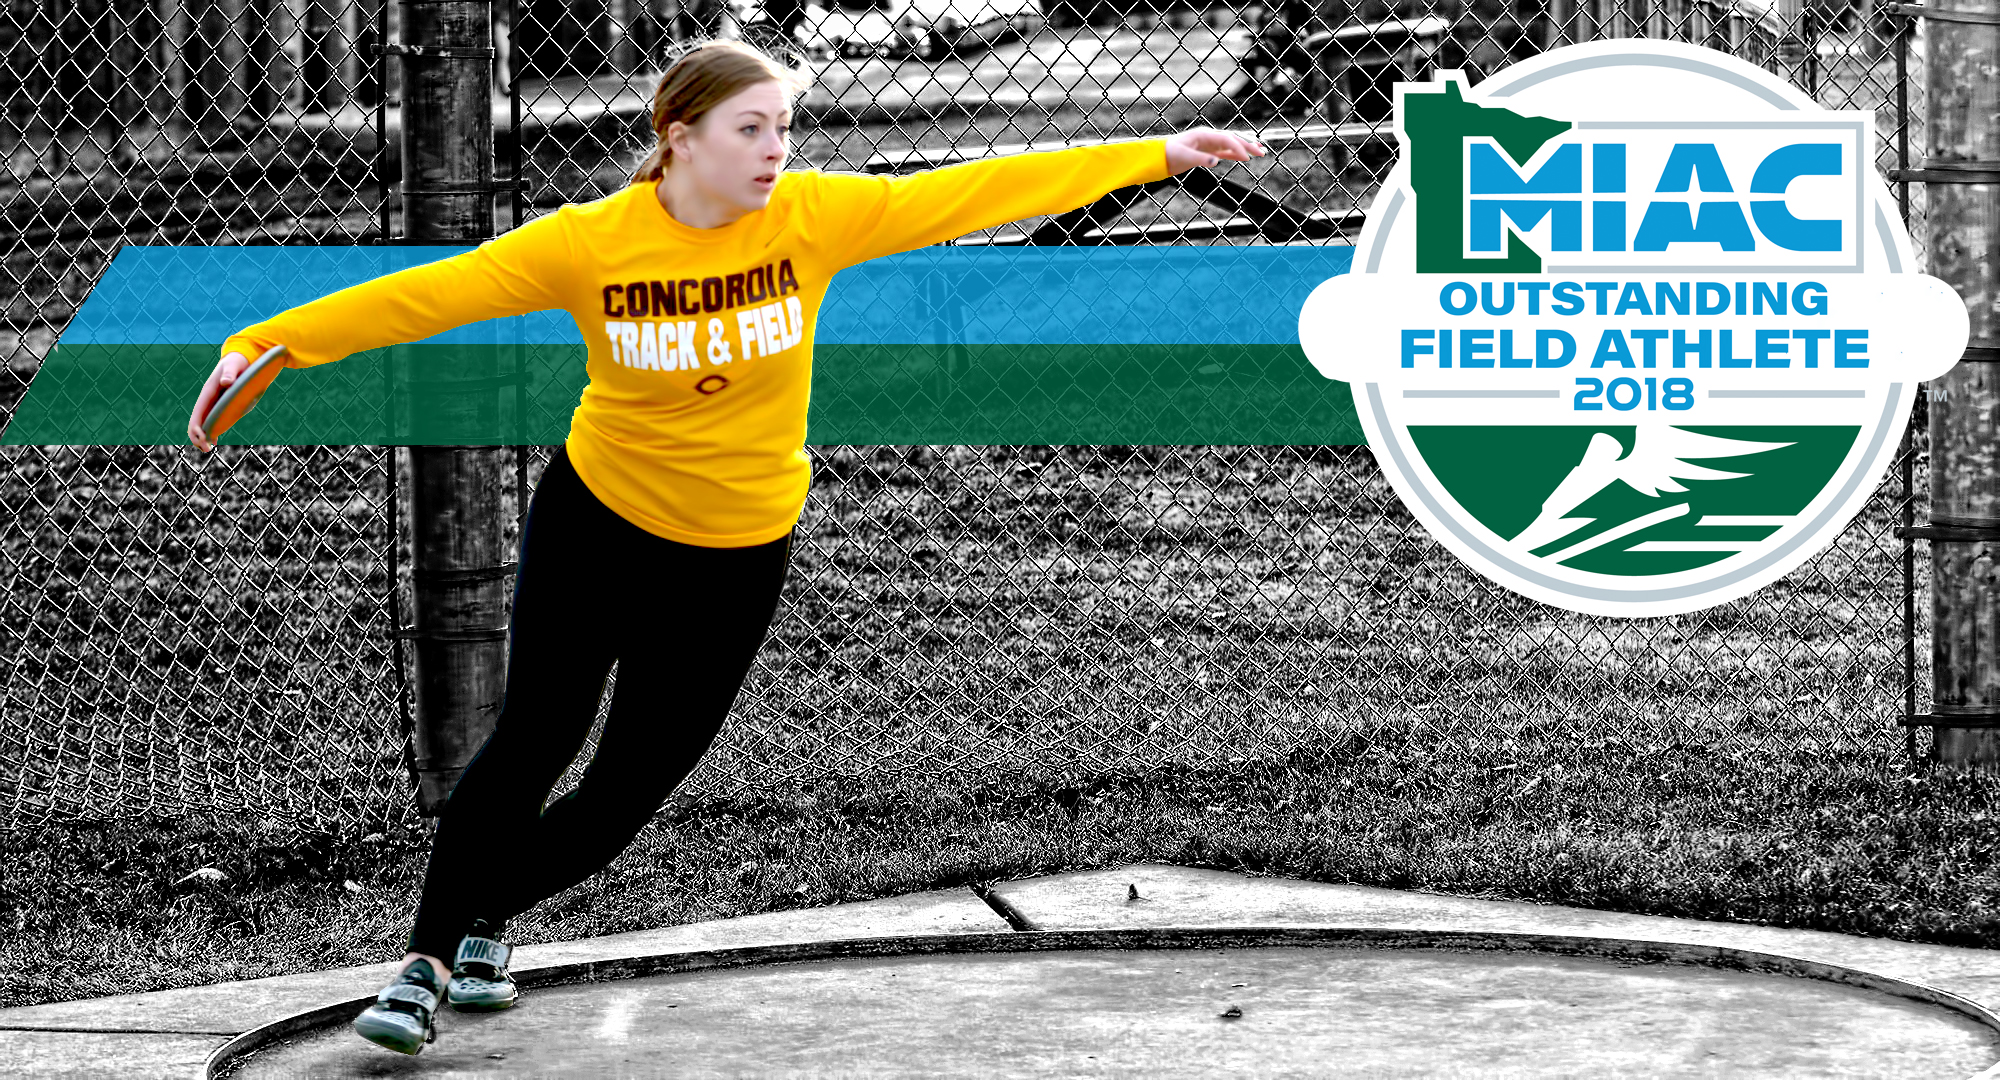 Senior Bailey Hovland was named the MIAC Most Outstanding Field Athlete for finishing in the Top 4 in the hammer, discus and shot put at the conference outdoor meet.